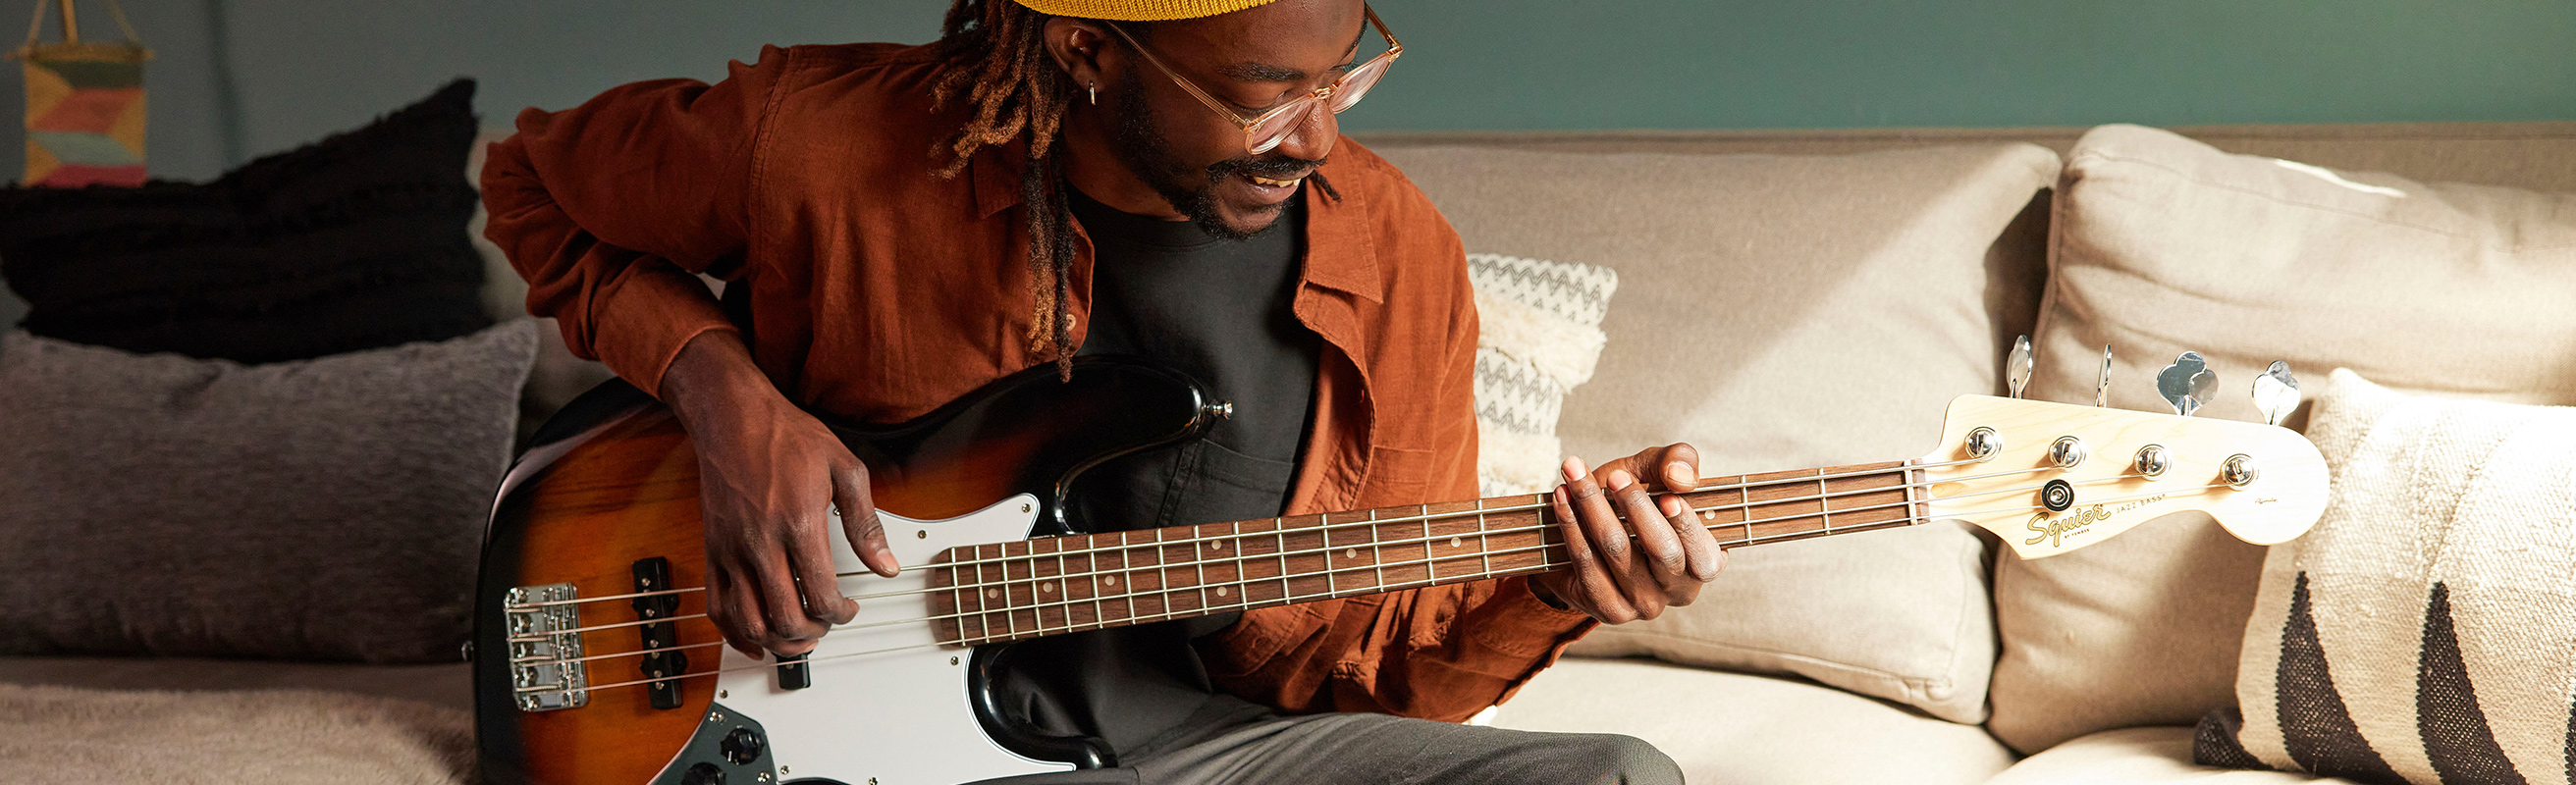 How To Play Bass Guitar: A Beginner's Guide